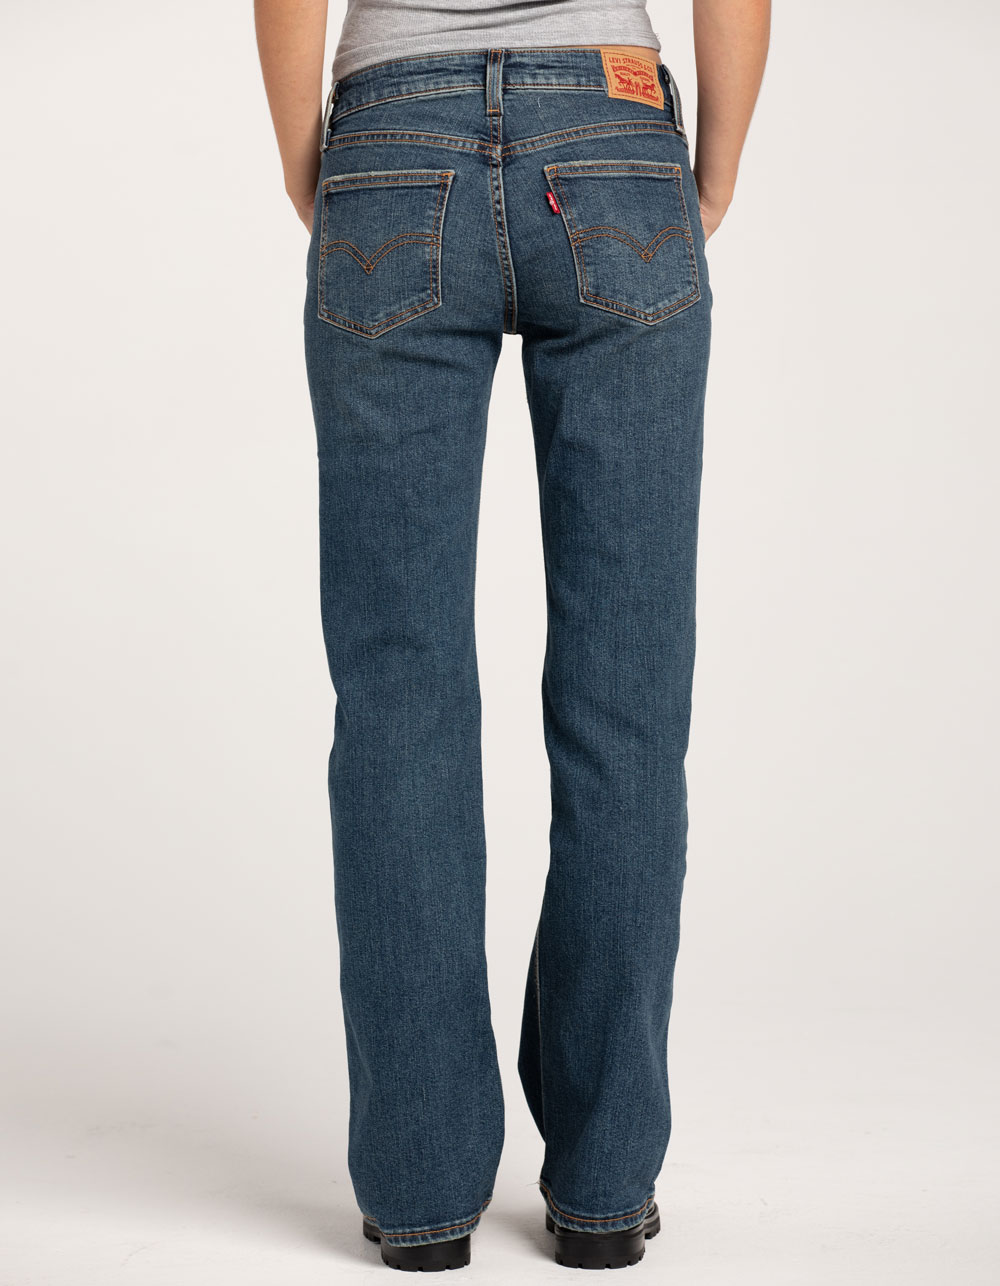 LEVI'S Superlow Bootcut Womens Jeans - Show On The Road